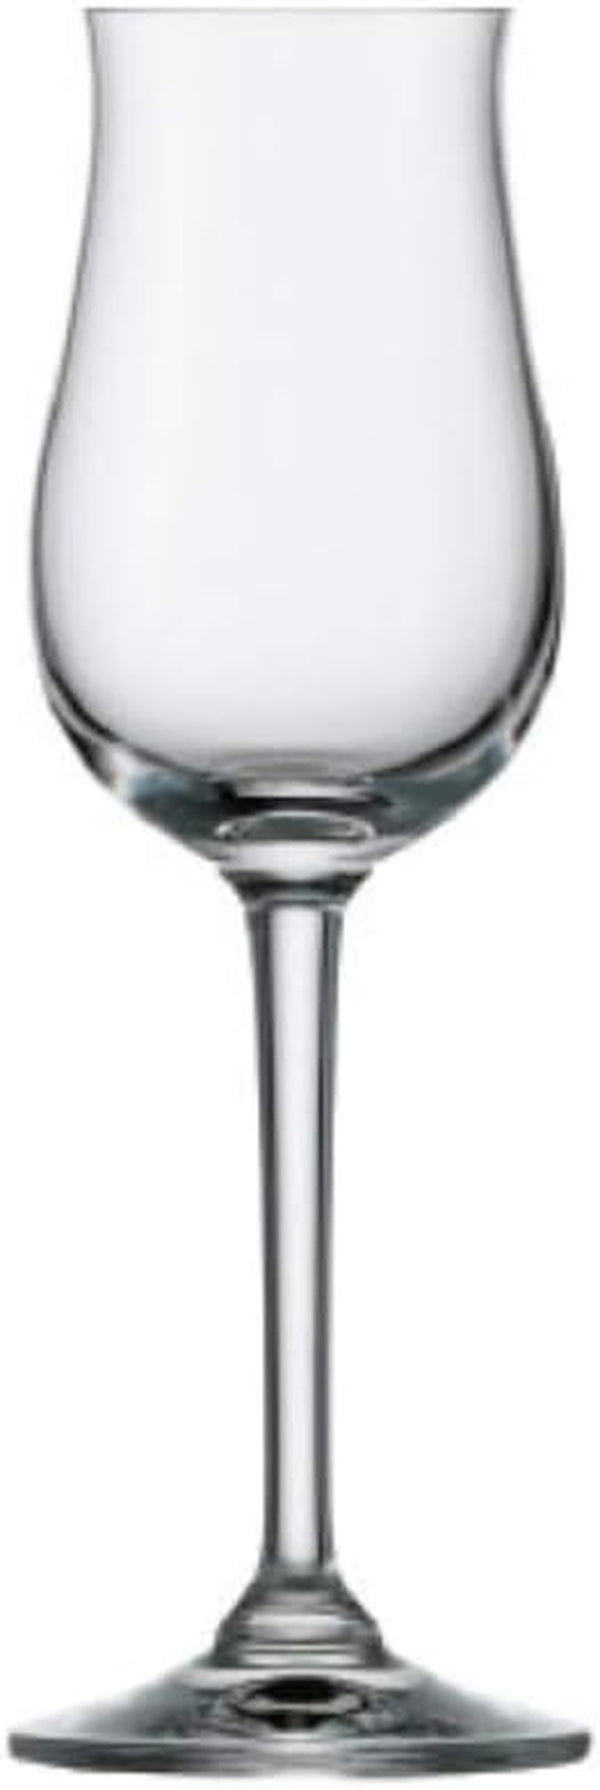 Stolzle – Professional Collection Clear Lead-Free Crystal Port Wine Glass, 3.5 oz. Set of 6